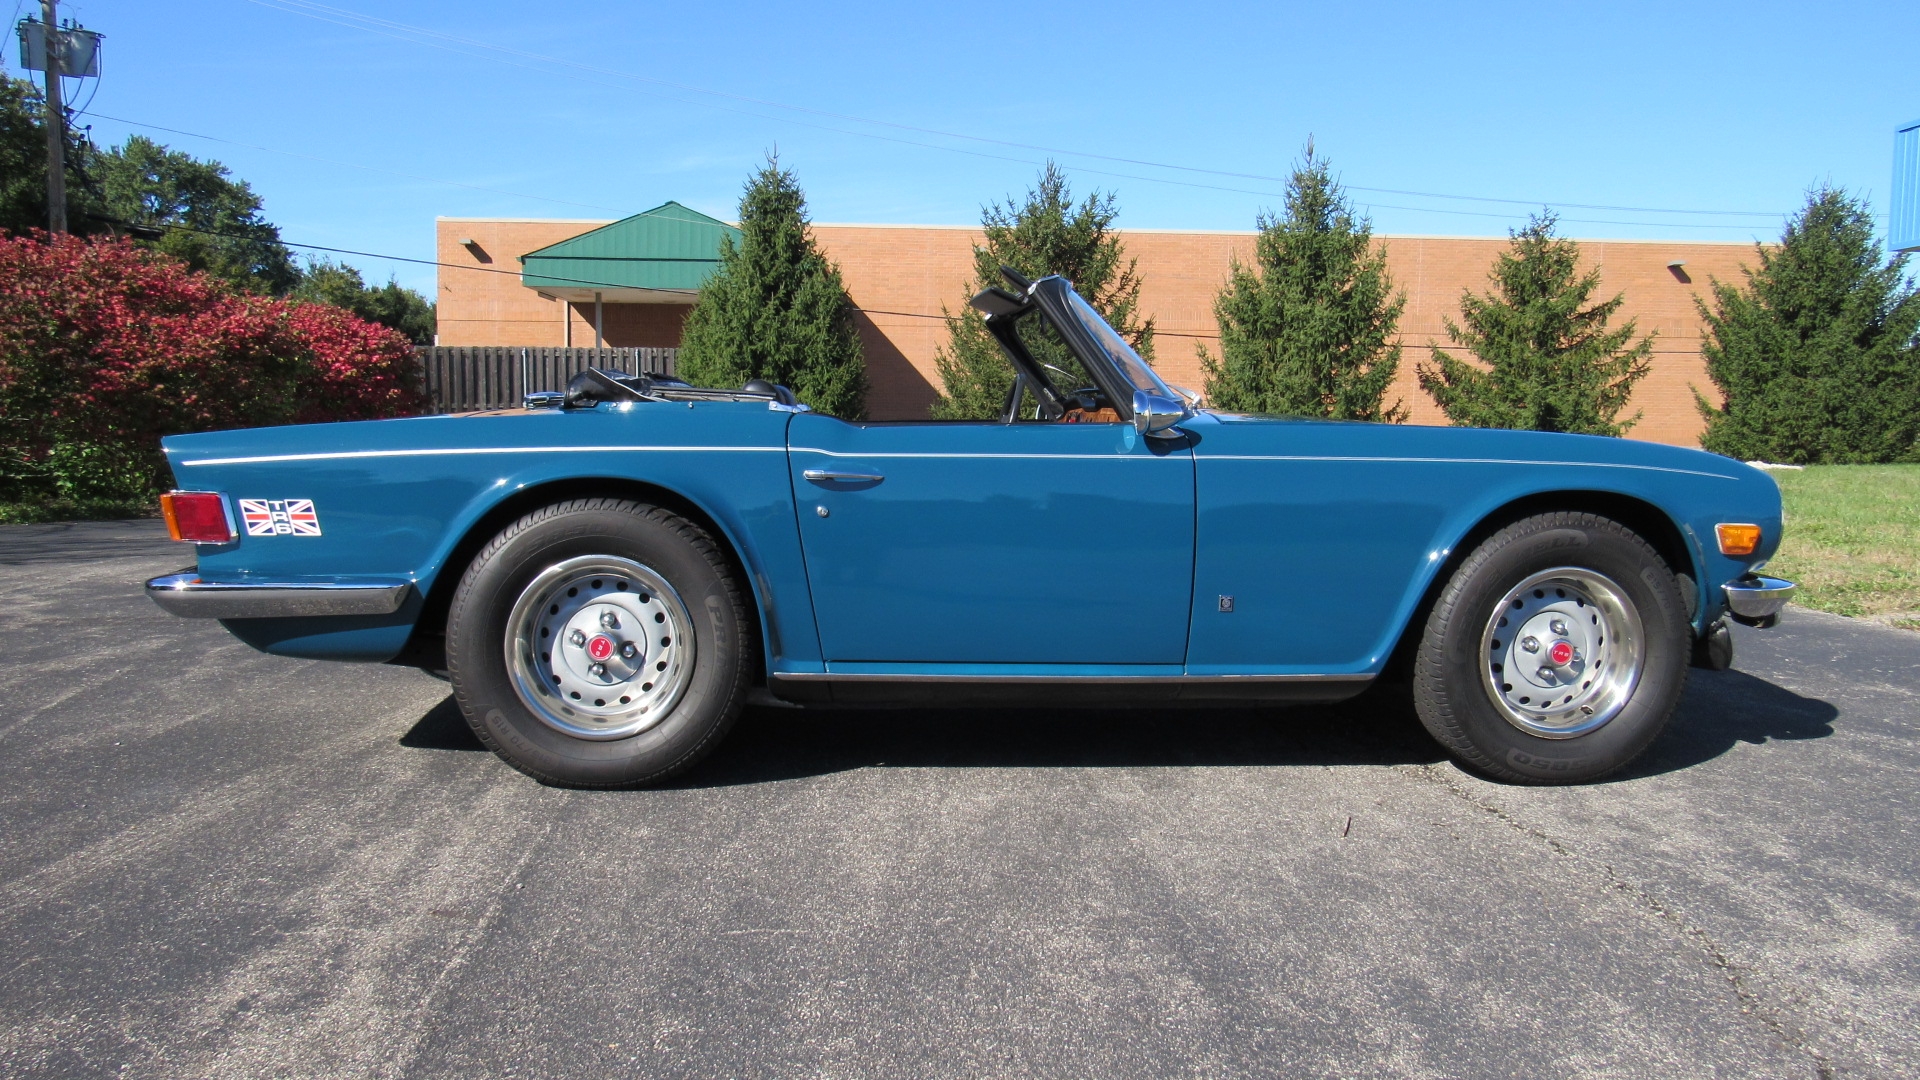 1975 TR6, Factory Overdrive, Restored, SOLD!